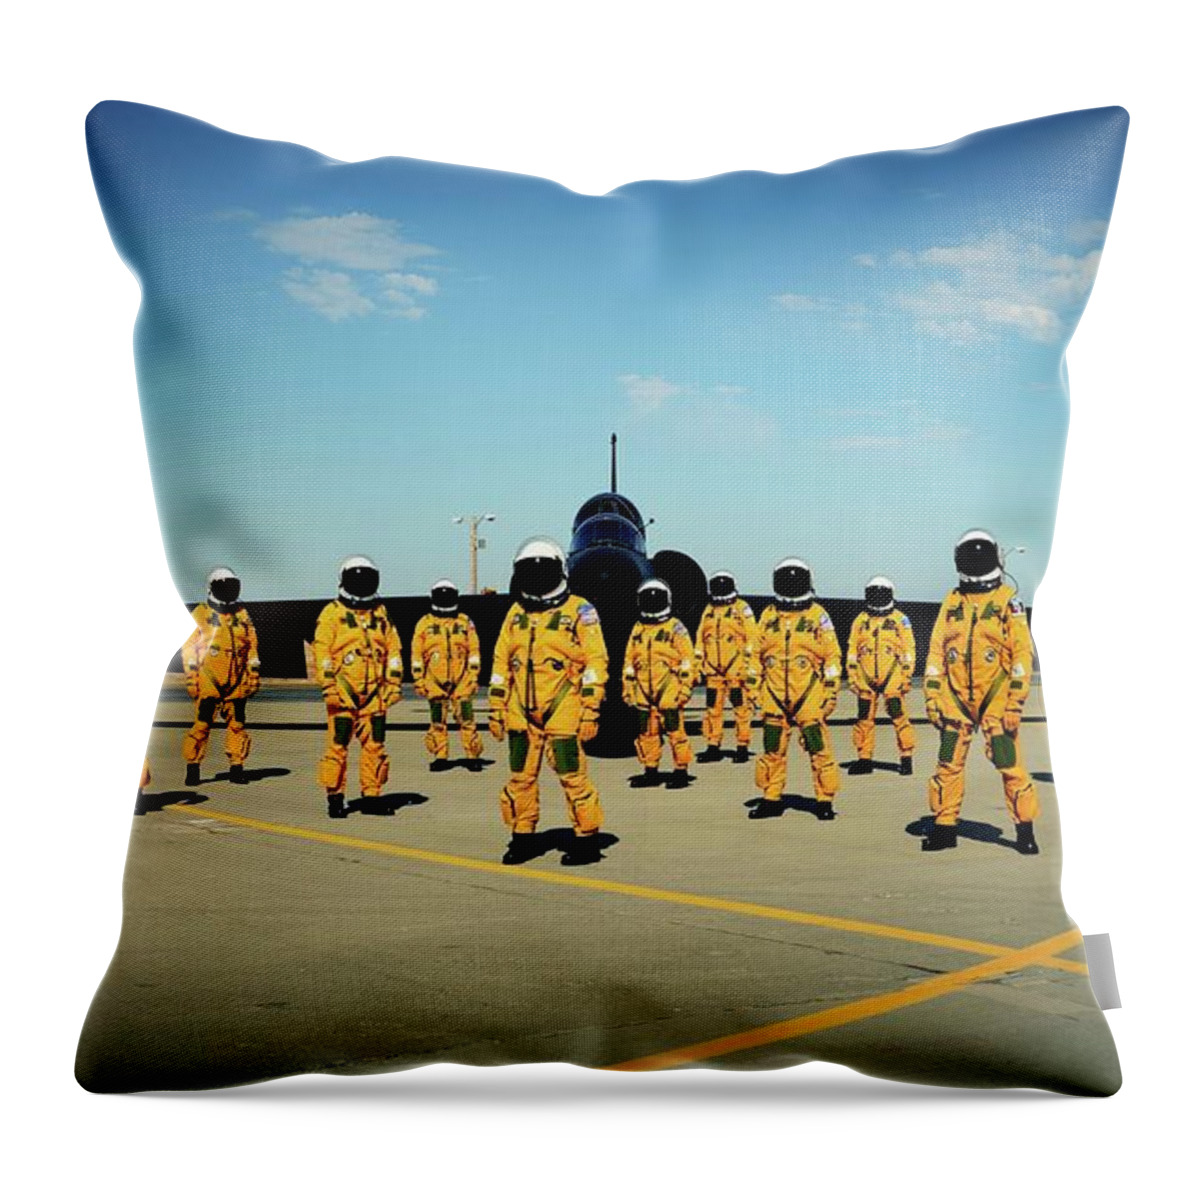 Pilot Throw Pillow featuring the photograph Pilot by Jackie Russo